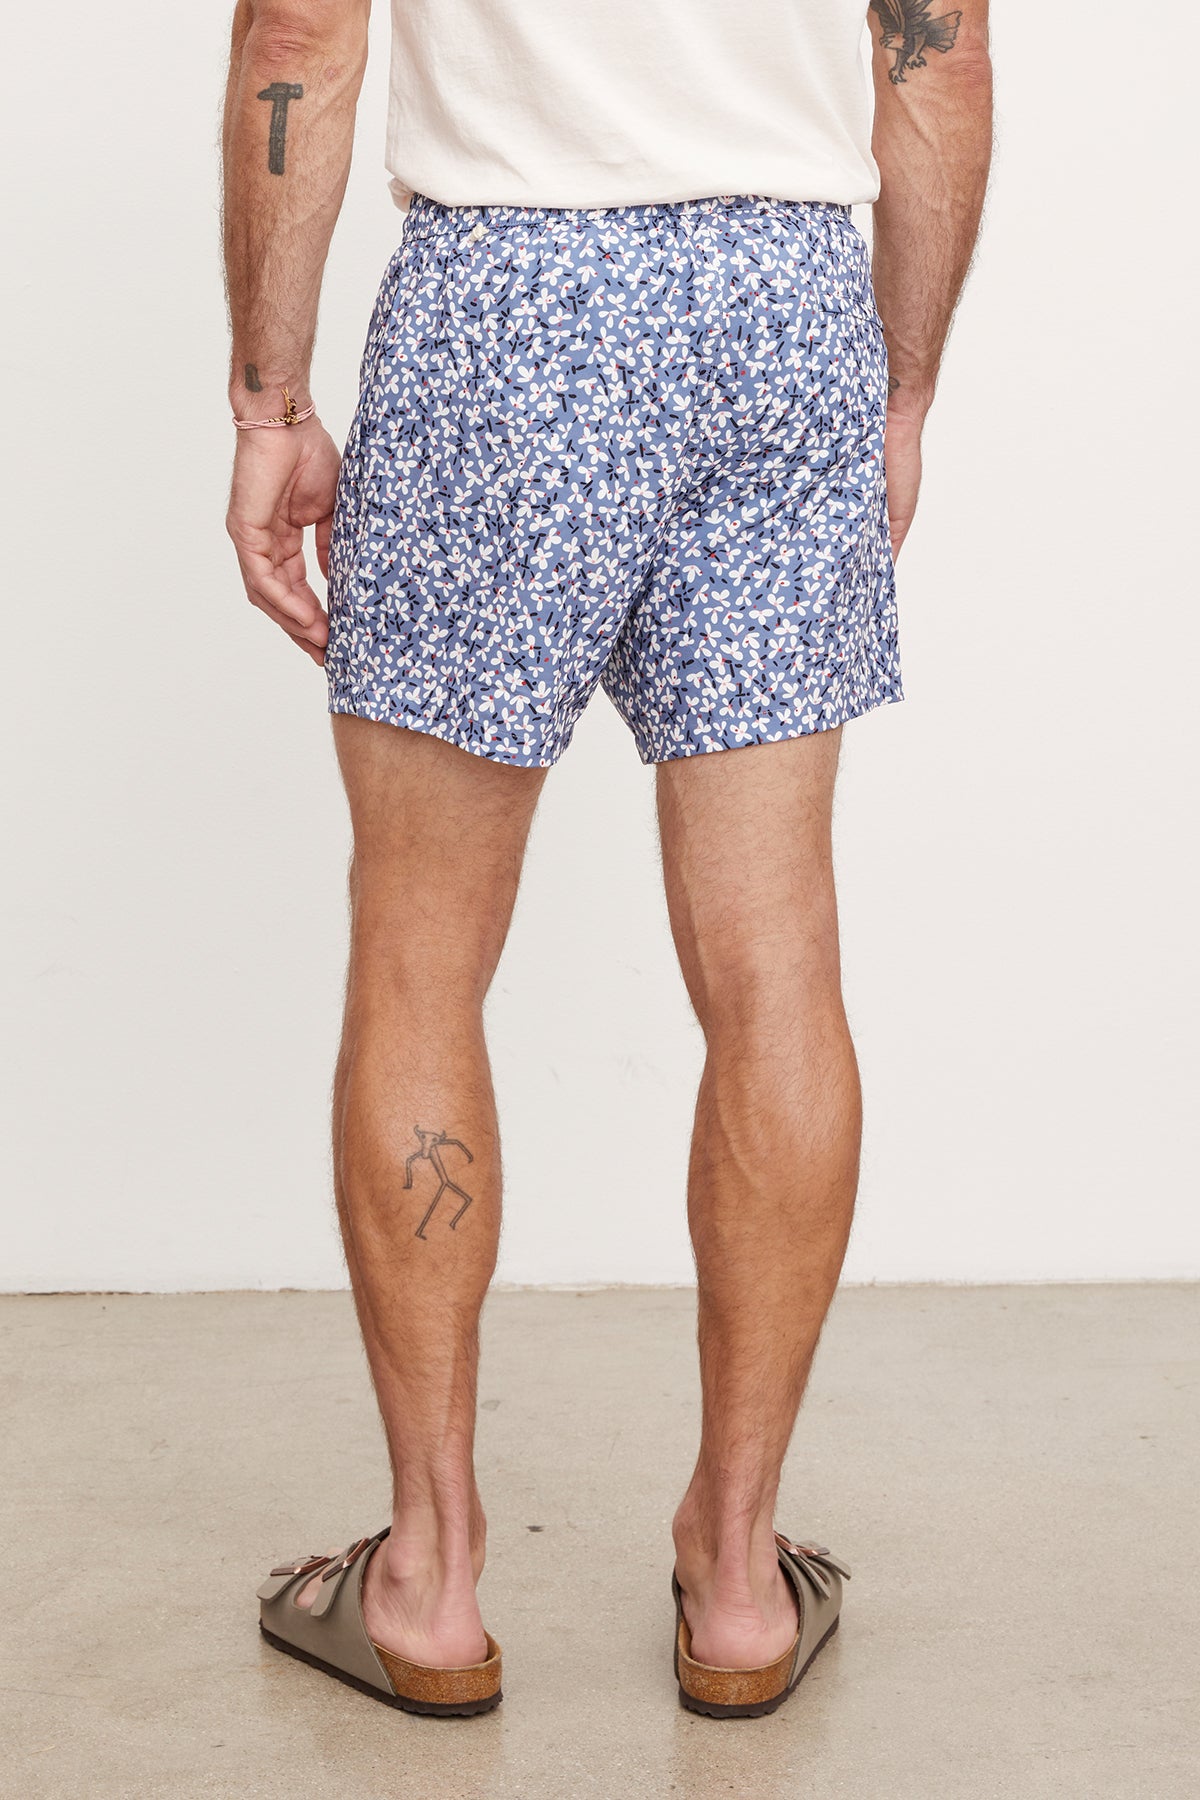 Man in Velvet by Graham & Spencer's RICARDO SWIM SHORT and brown flip-flops, standing with his back to the camera, displaying a tattoo on his right calf.-36918541910209